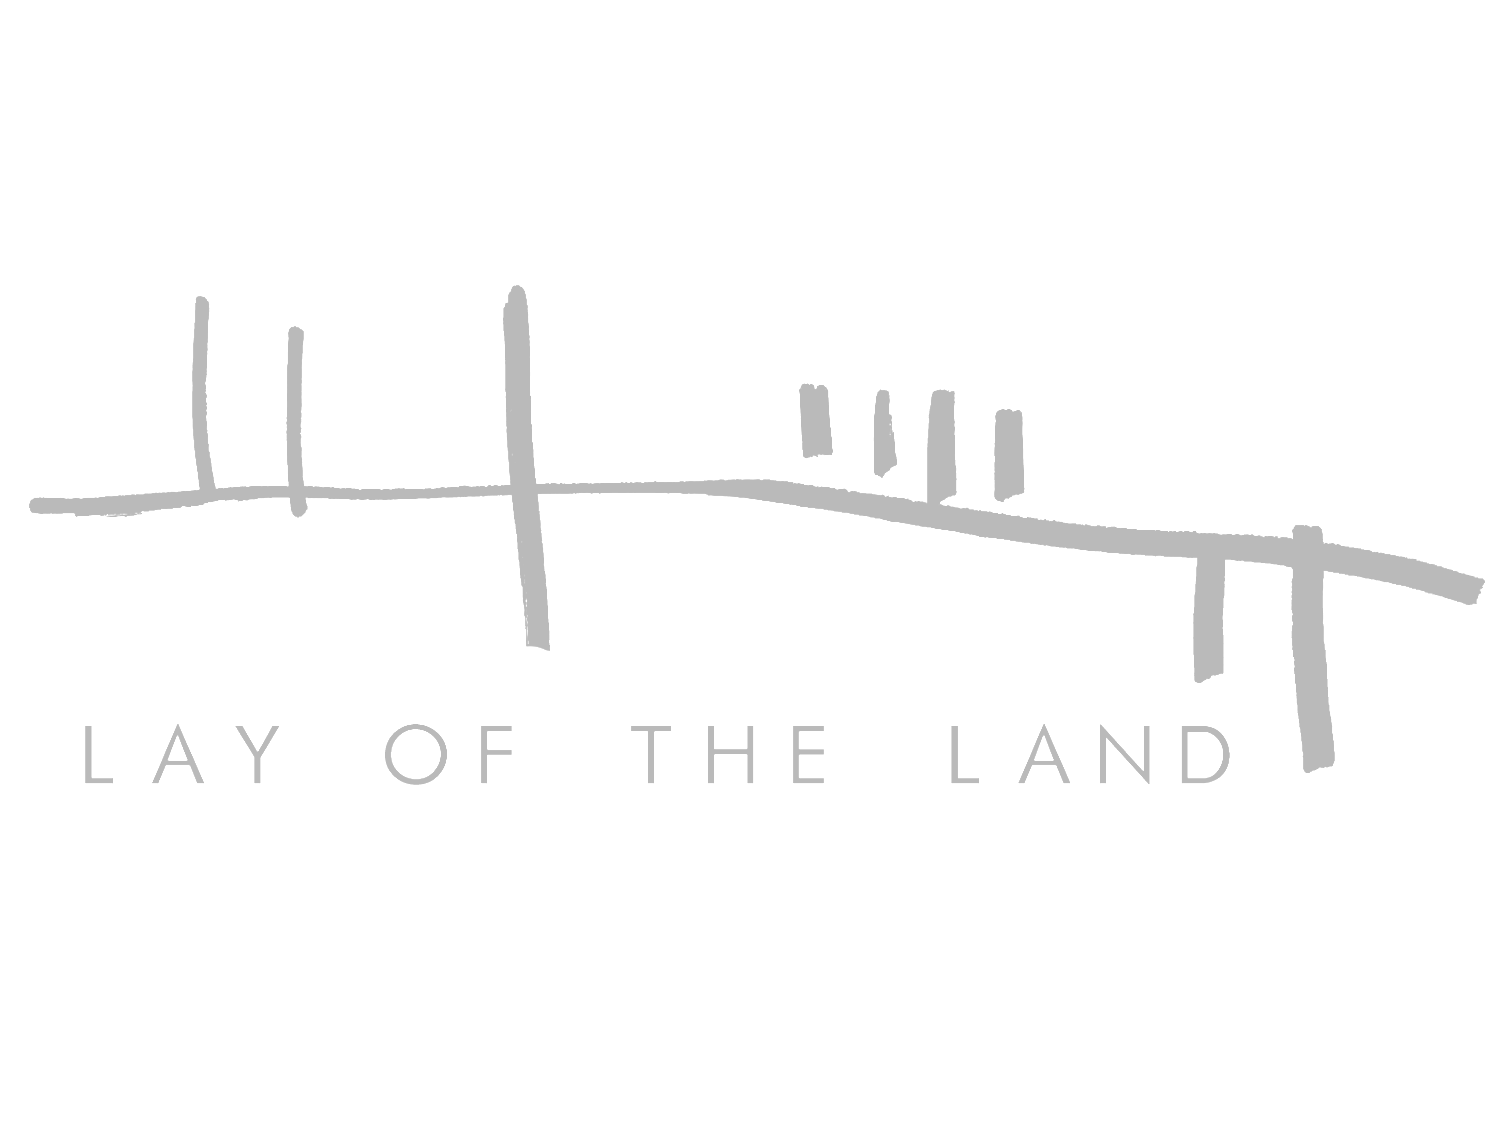 Lay of the land